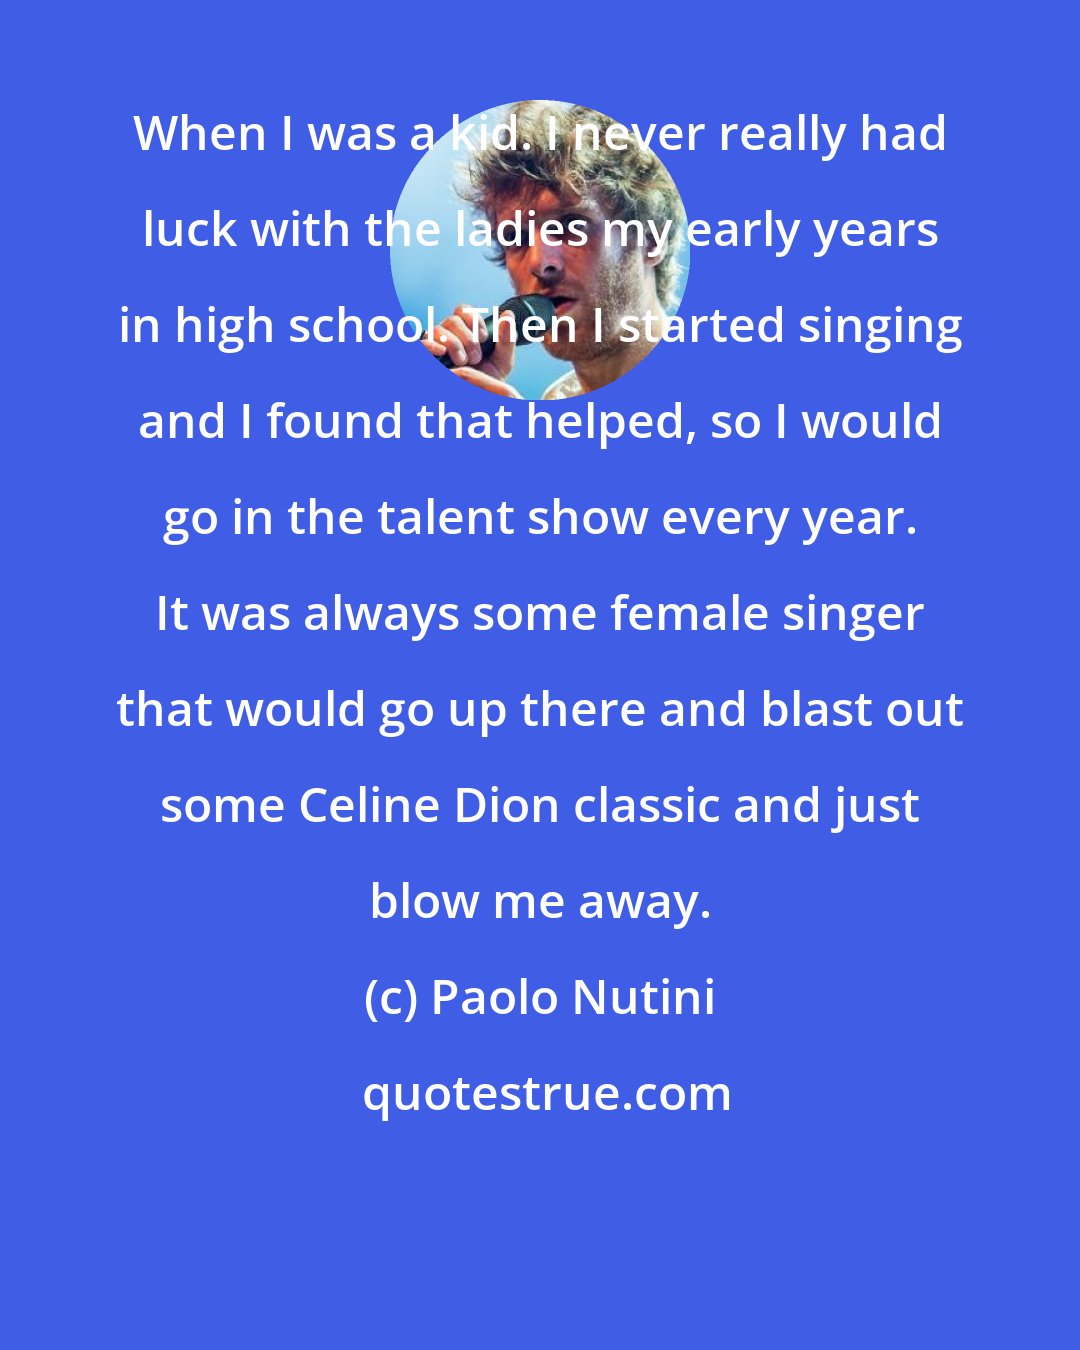 Paolo Nutini: When I was a kid. I never really had luck with the ladies my early years in high school. Then I started singing and I found that helped, so I would go in the talent show every year. It was always some female singer that would go up there and blast out some Celine Dion classic and just blow me away.